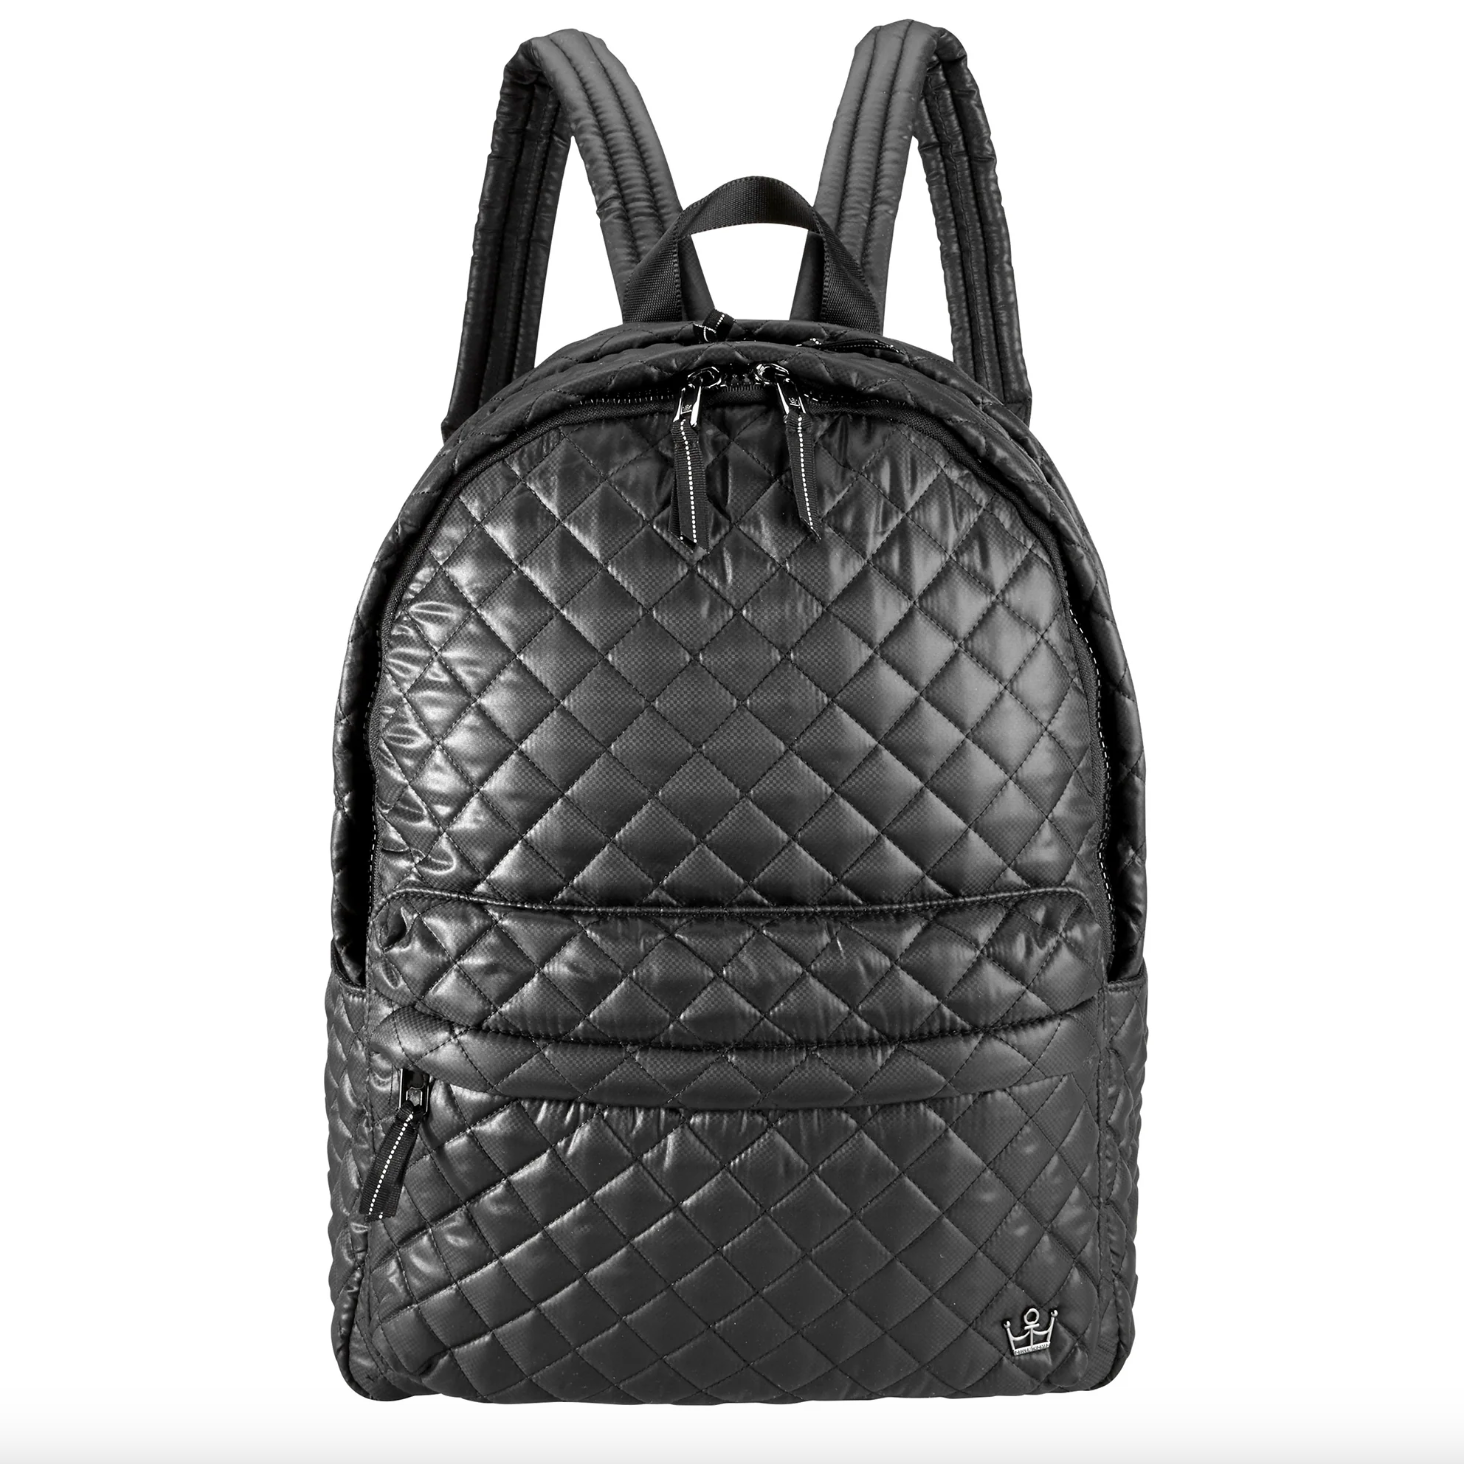 Oliver Thomas Wingwoman Laptop Backpack Backpacks in Graphite at Wrapsody